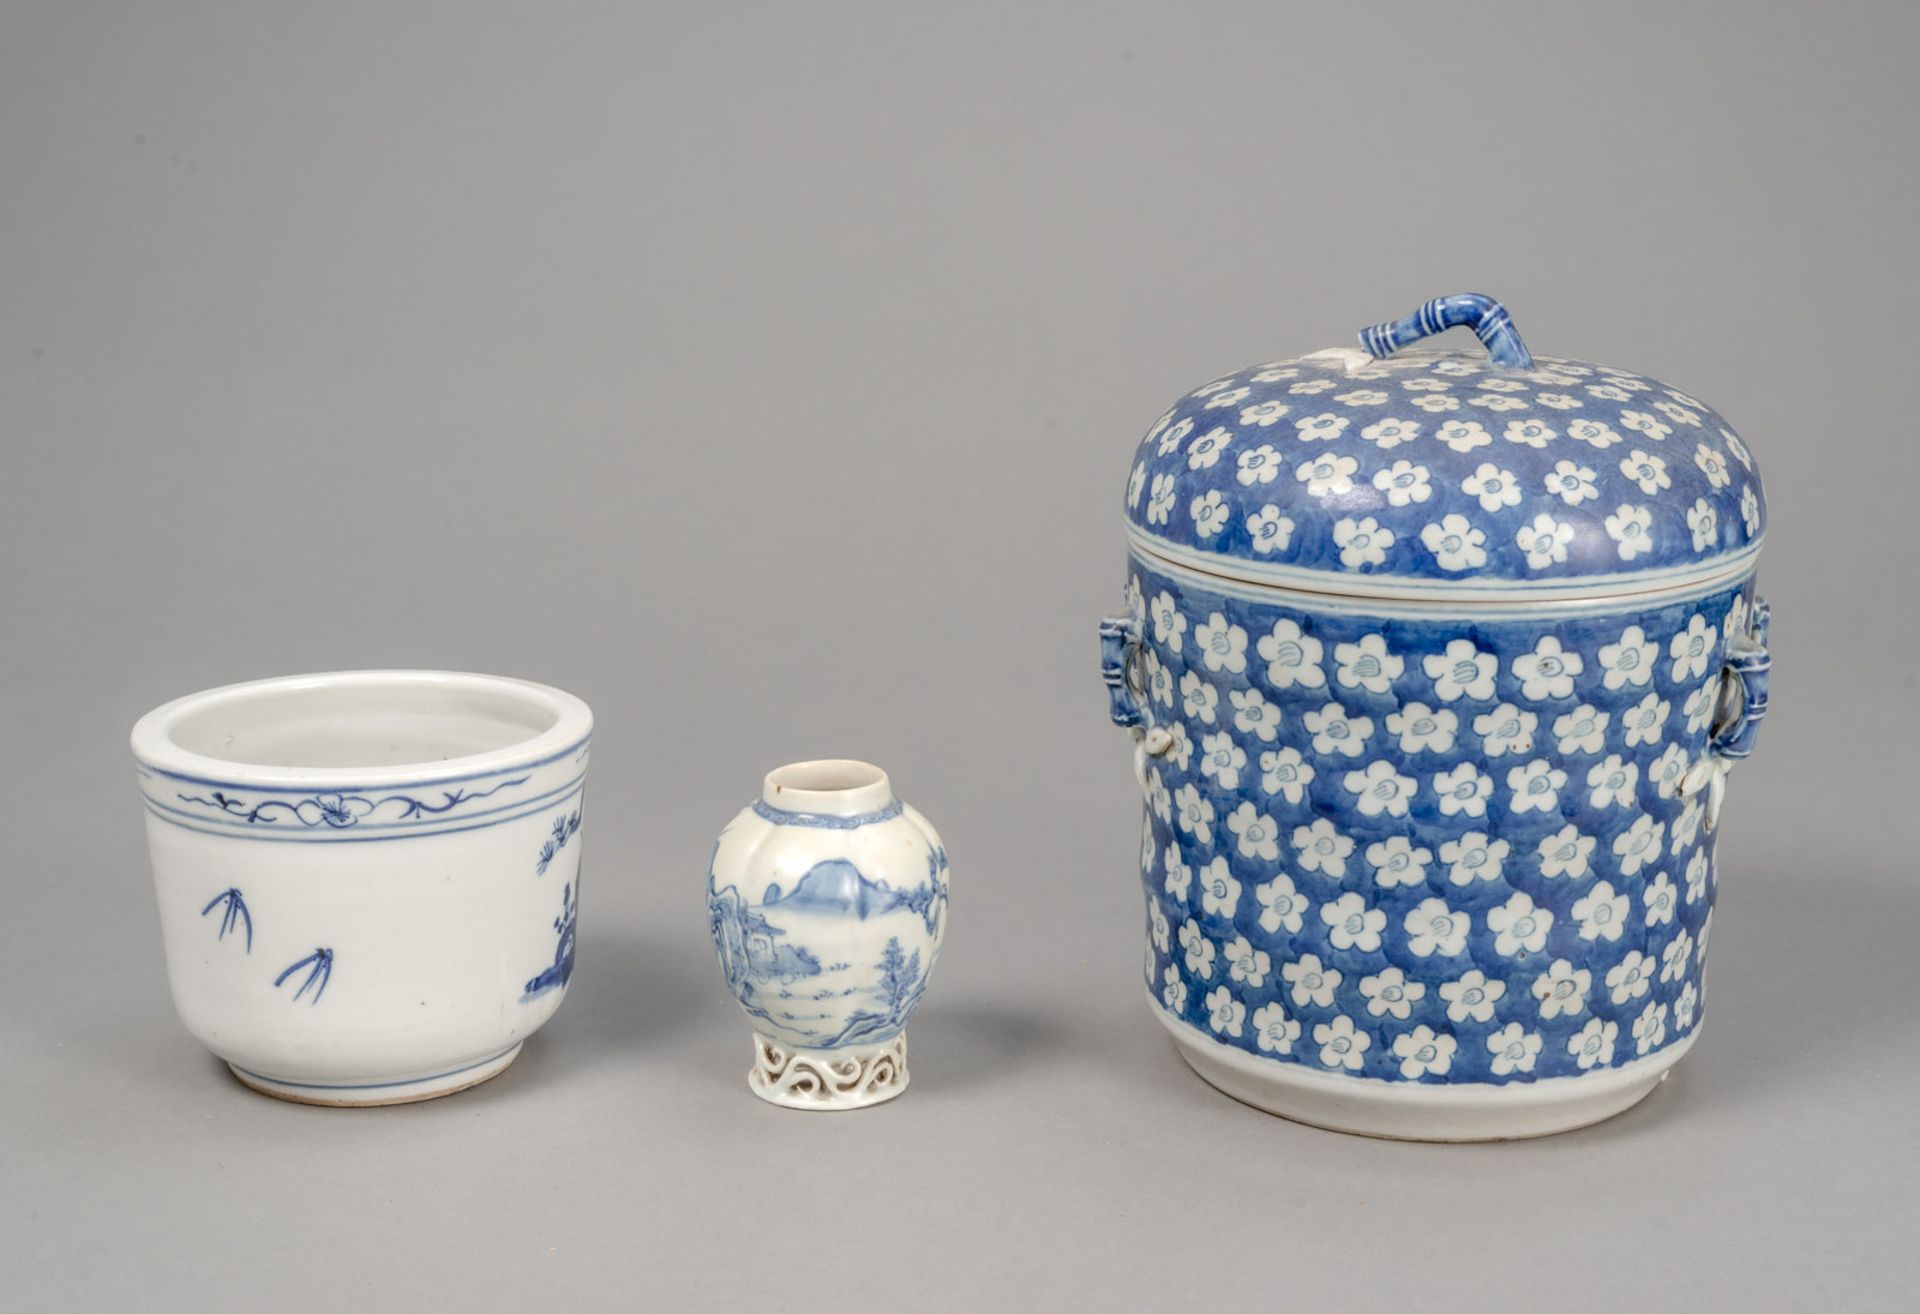 A BLUE AND WHITE PRUNUS AND BAMBOO PORCELAIN BOX WITH COVER, A CENSER, AND A SMALL VASE - Image 3 of 4